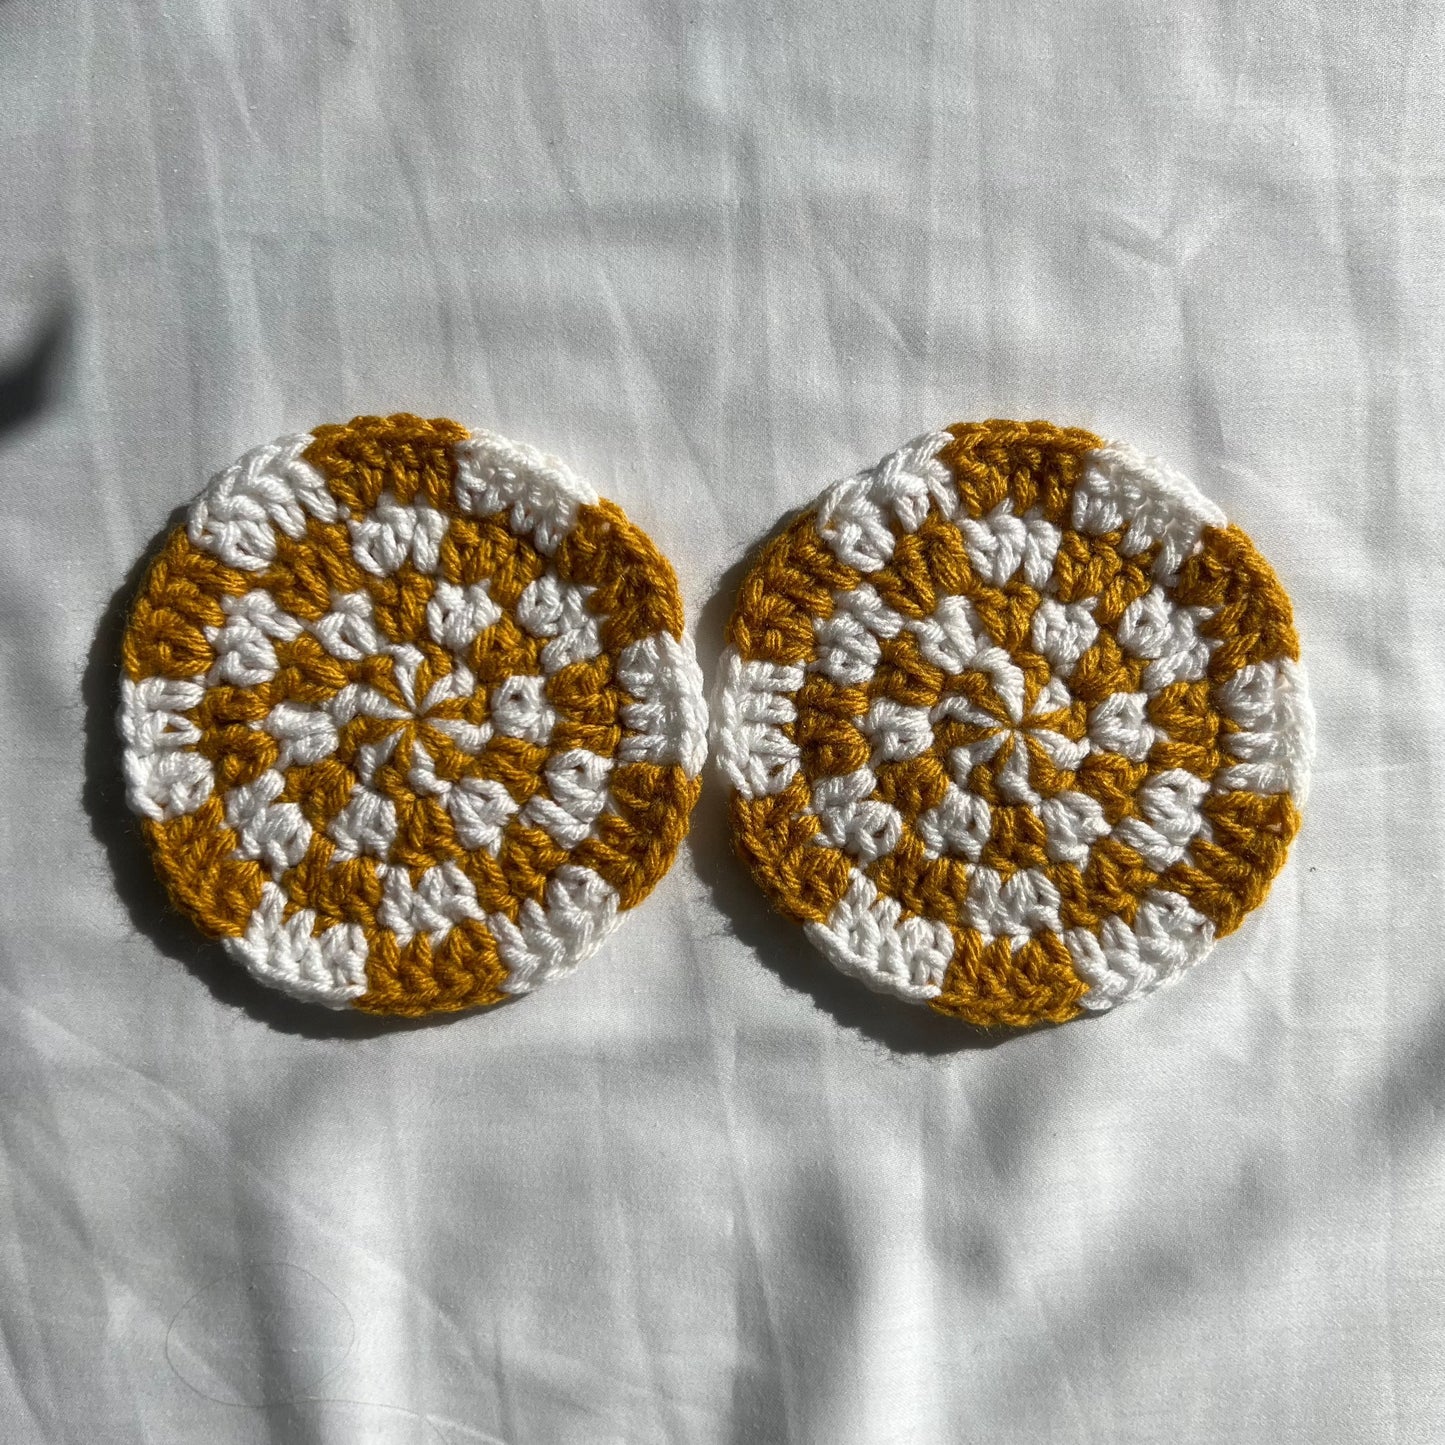 Round Funky Checkered Coasters - Set of 2